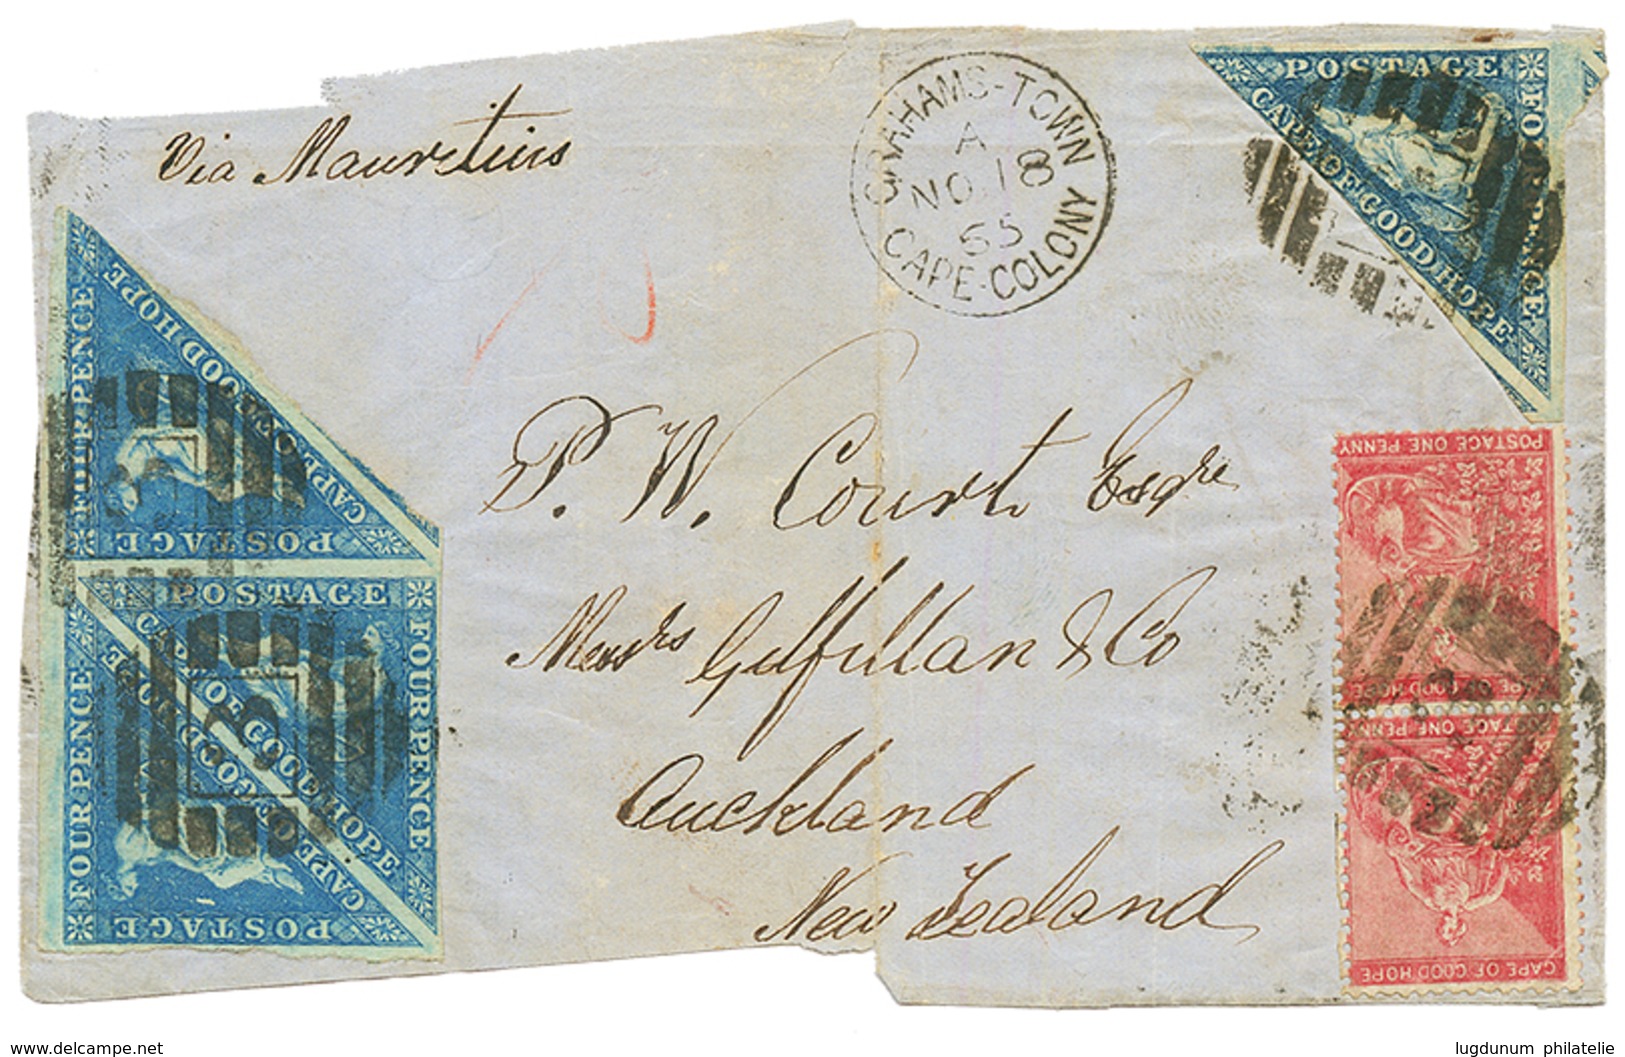 1865 TRiangular 4d (x4) + 1d Red(x2) Canc. 3 + GRAHAMS-TOWN CAPE COLONY On Cover (FRONT Only) Via "MAURITIUS" To AUCKLAN - Kap Der Guten Hoffnung (1853-1904)